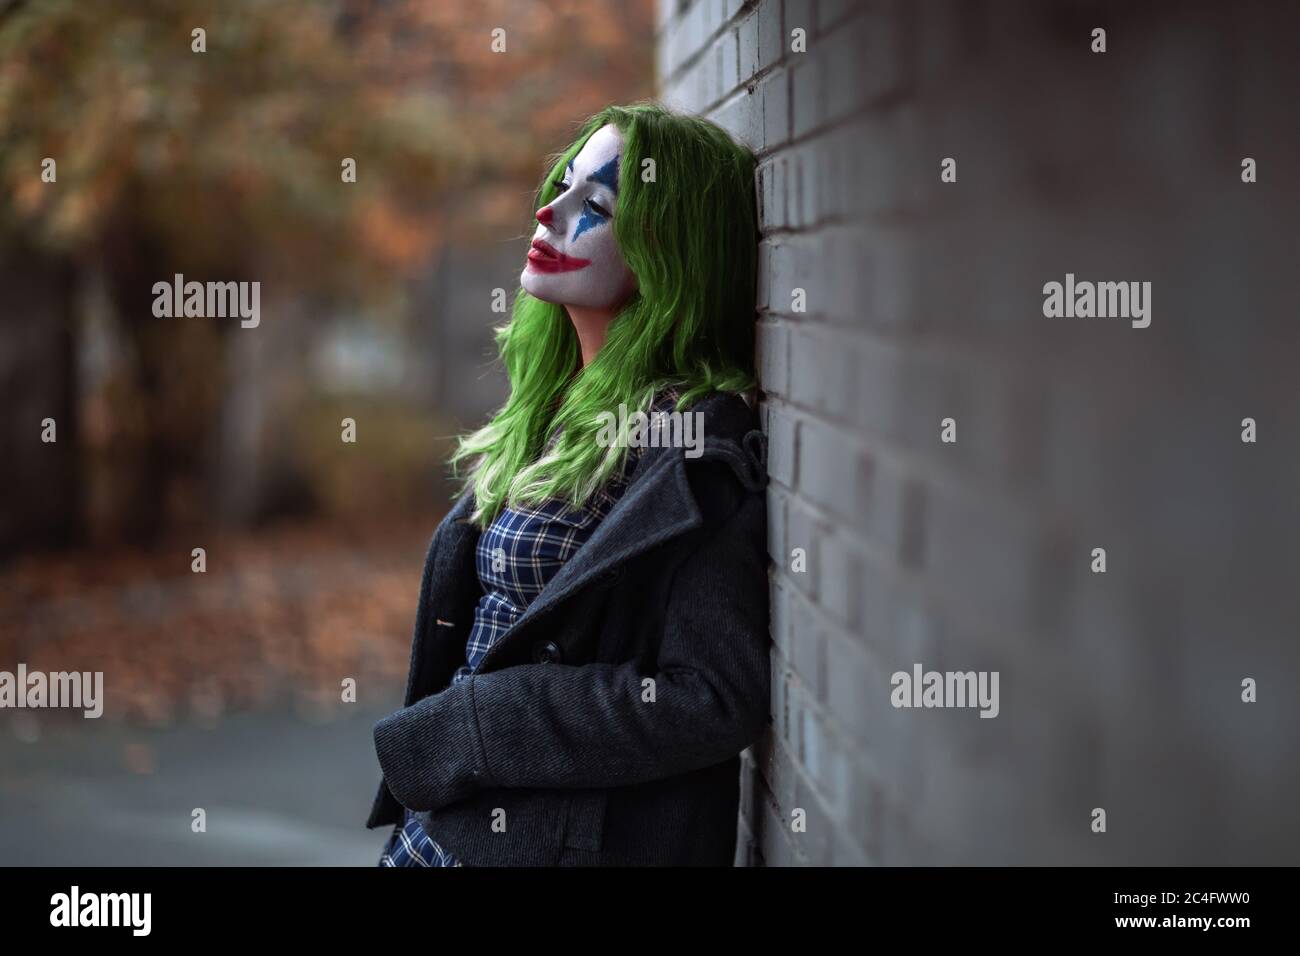 Portrait of a greenhaired girl in chekered dress with joker makeup on a brick wall blurred background. Stock Photo